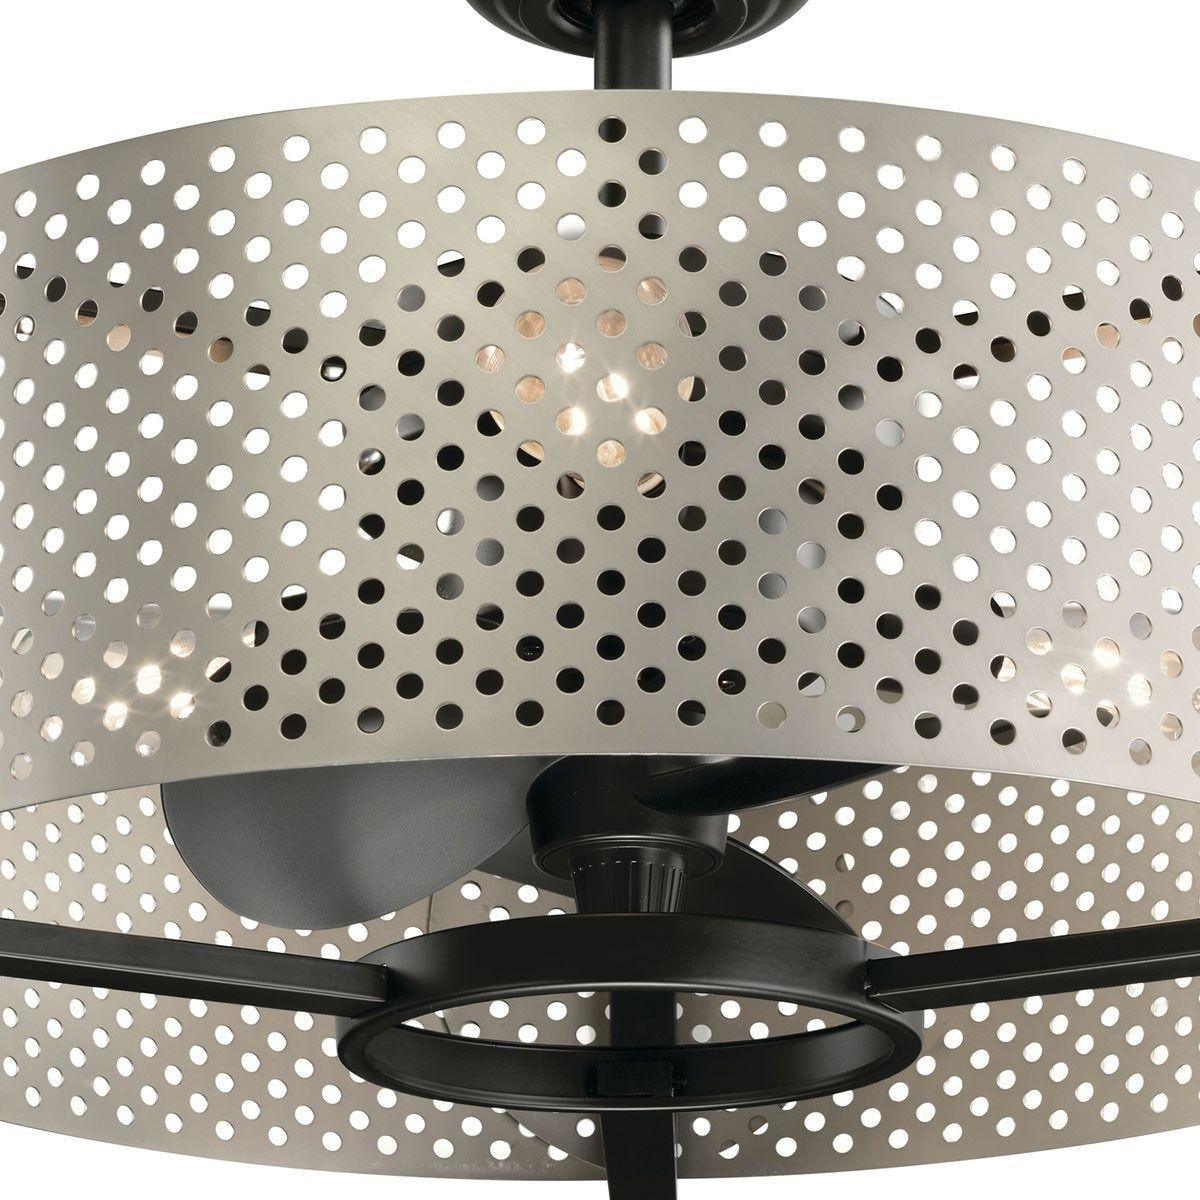 Eyrie 23 Inch Modern Chandelier Ceiling Fan With Light, Wall Control Included - Bees Lighting